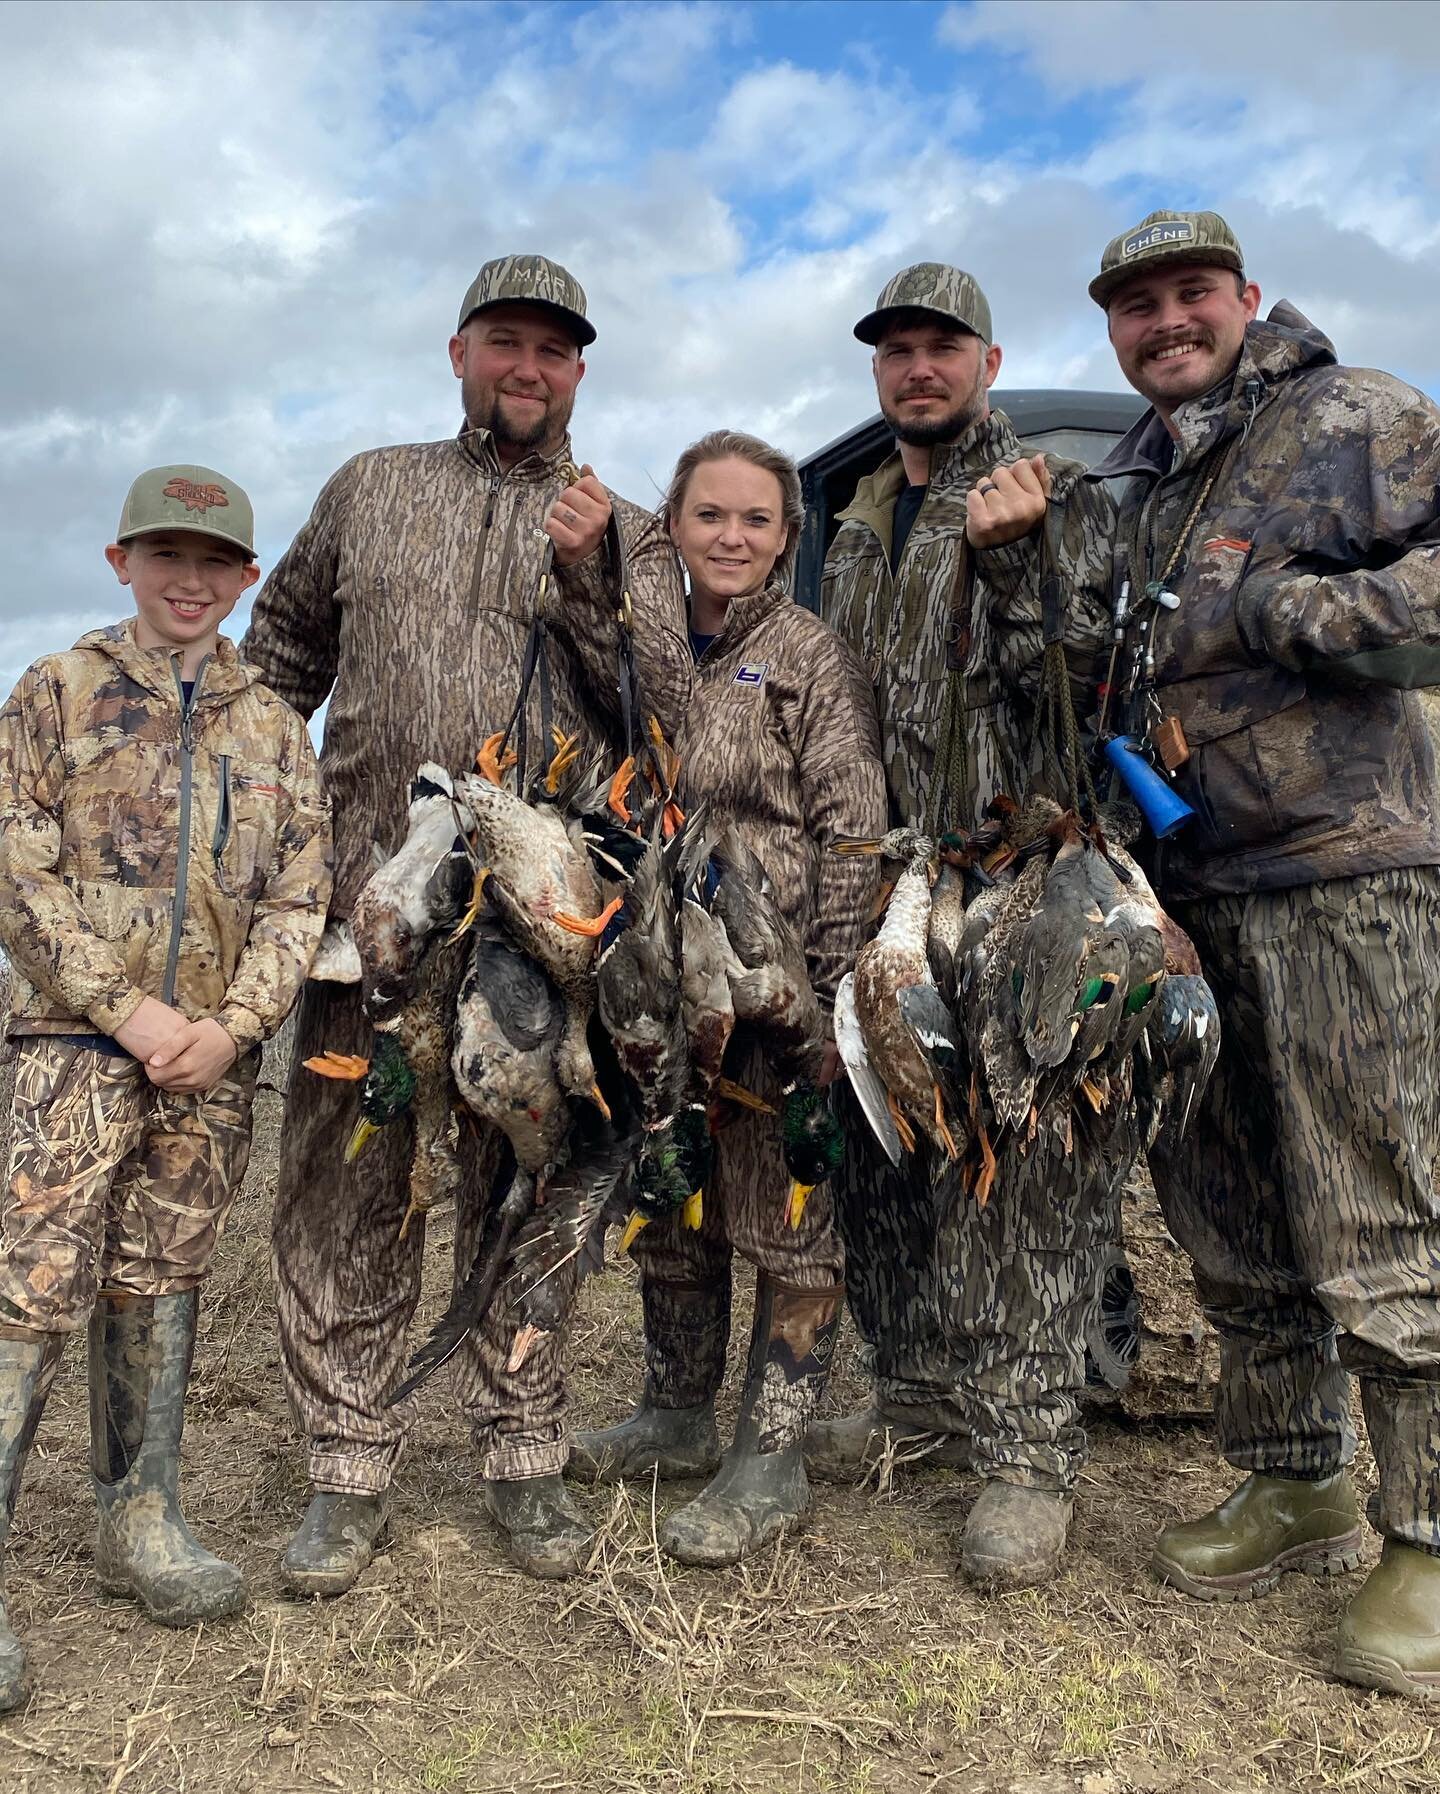 Hard south wind produce for us today! And if you haven&rsquo;t booked your hunt this year we still have a good many open dates in January. Call (318)-201-3474 to book your hunt! #robrobertscustomgunworks #singletongamecalls #drakewaterfowl #migraammo